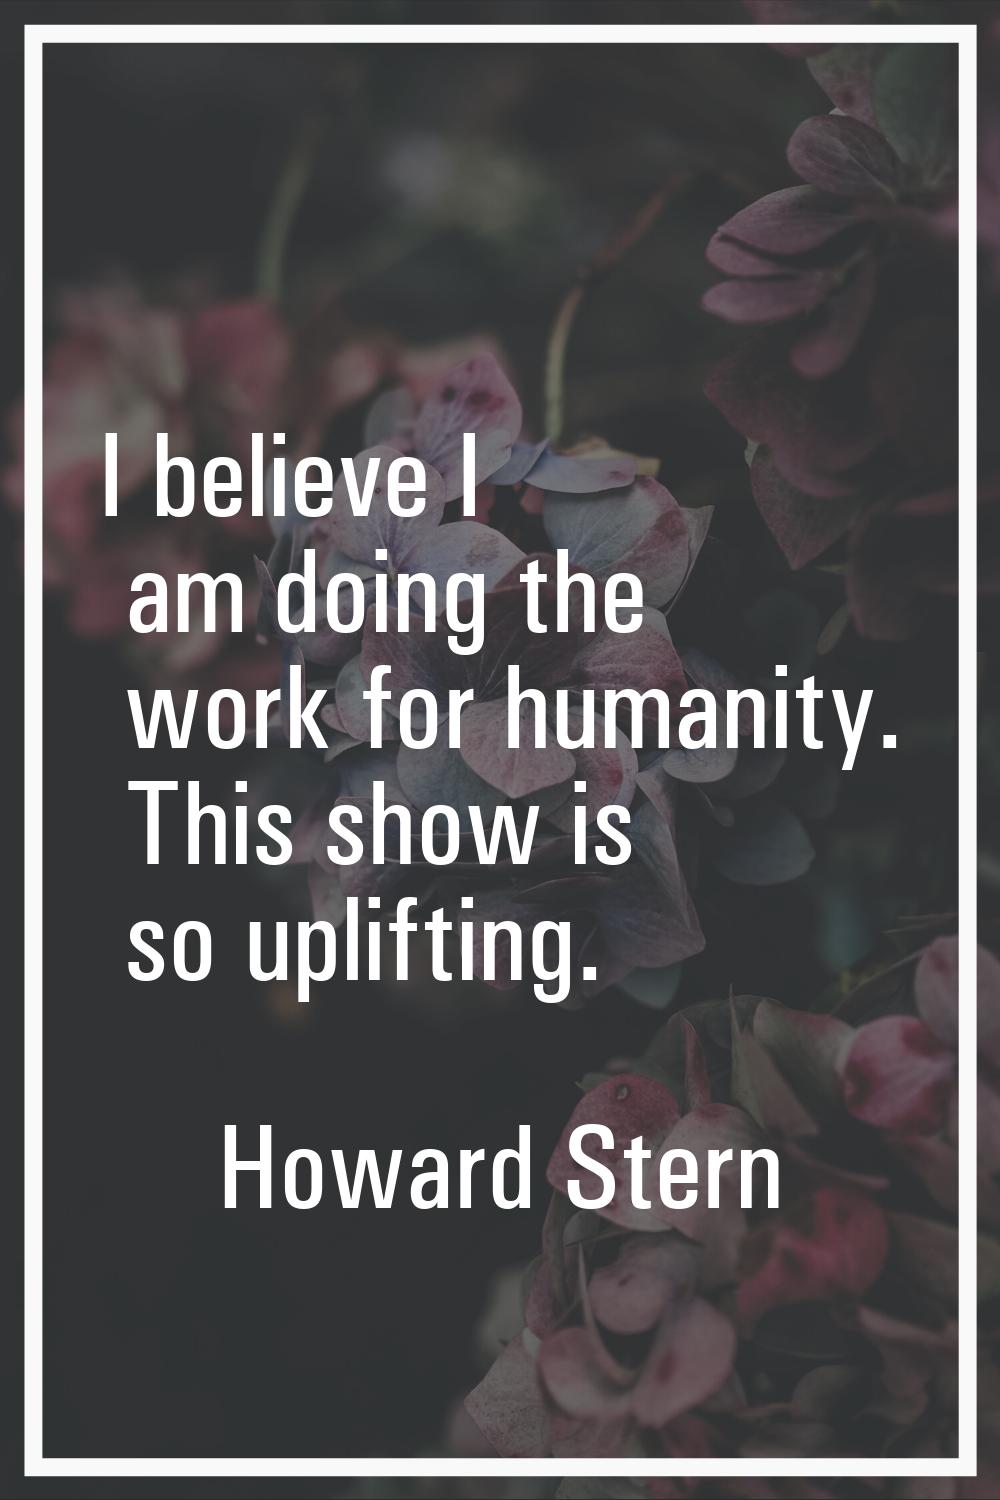 I believe I am doing the work for humanity. This show is so uplifting.